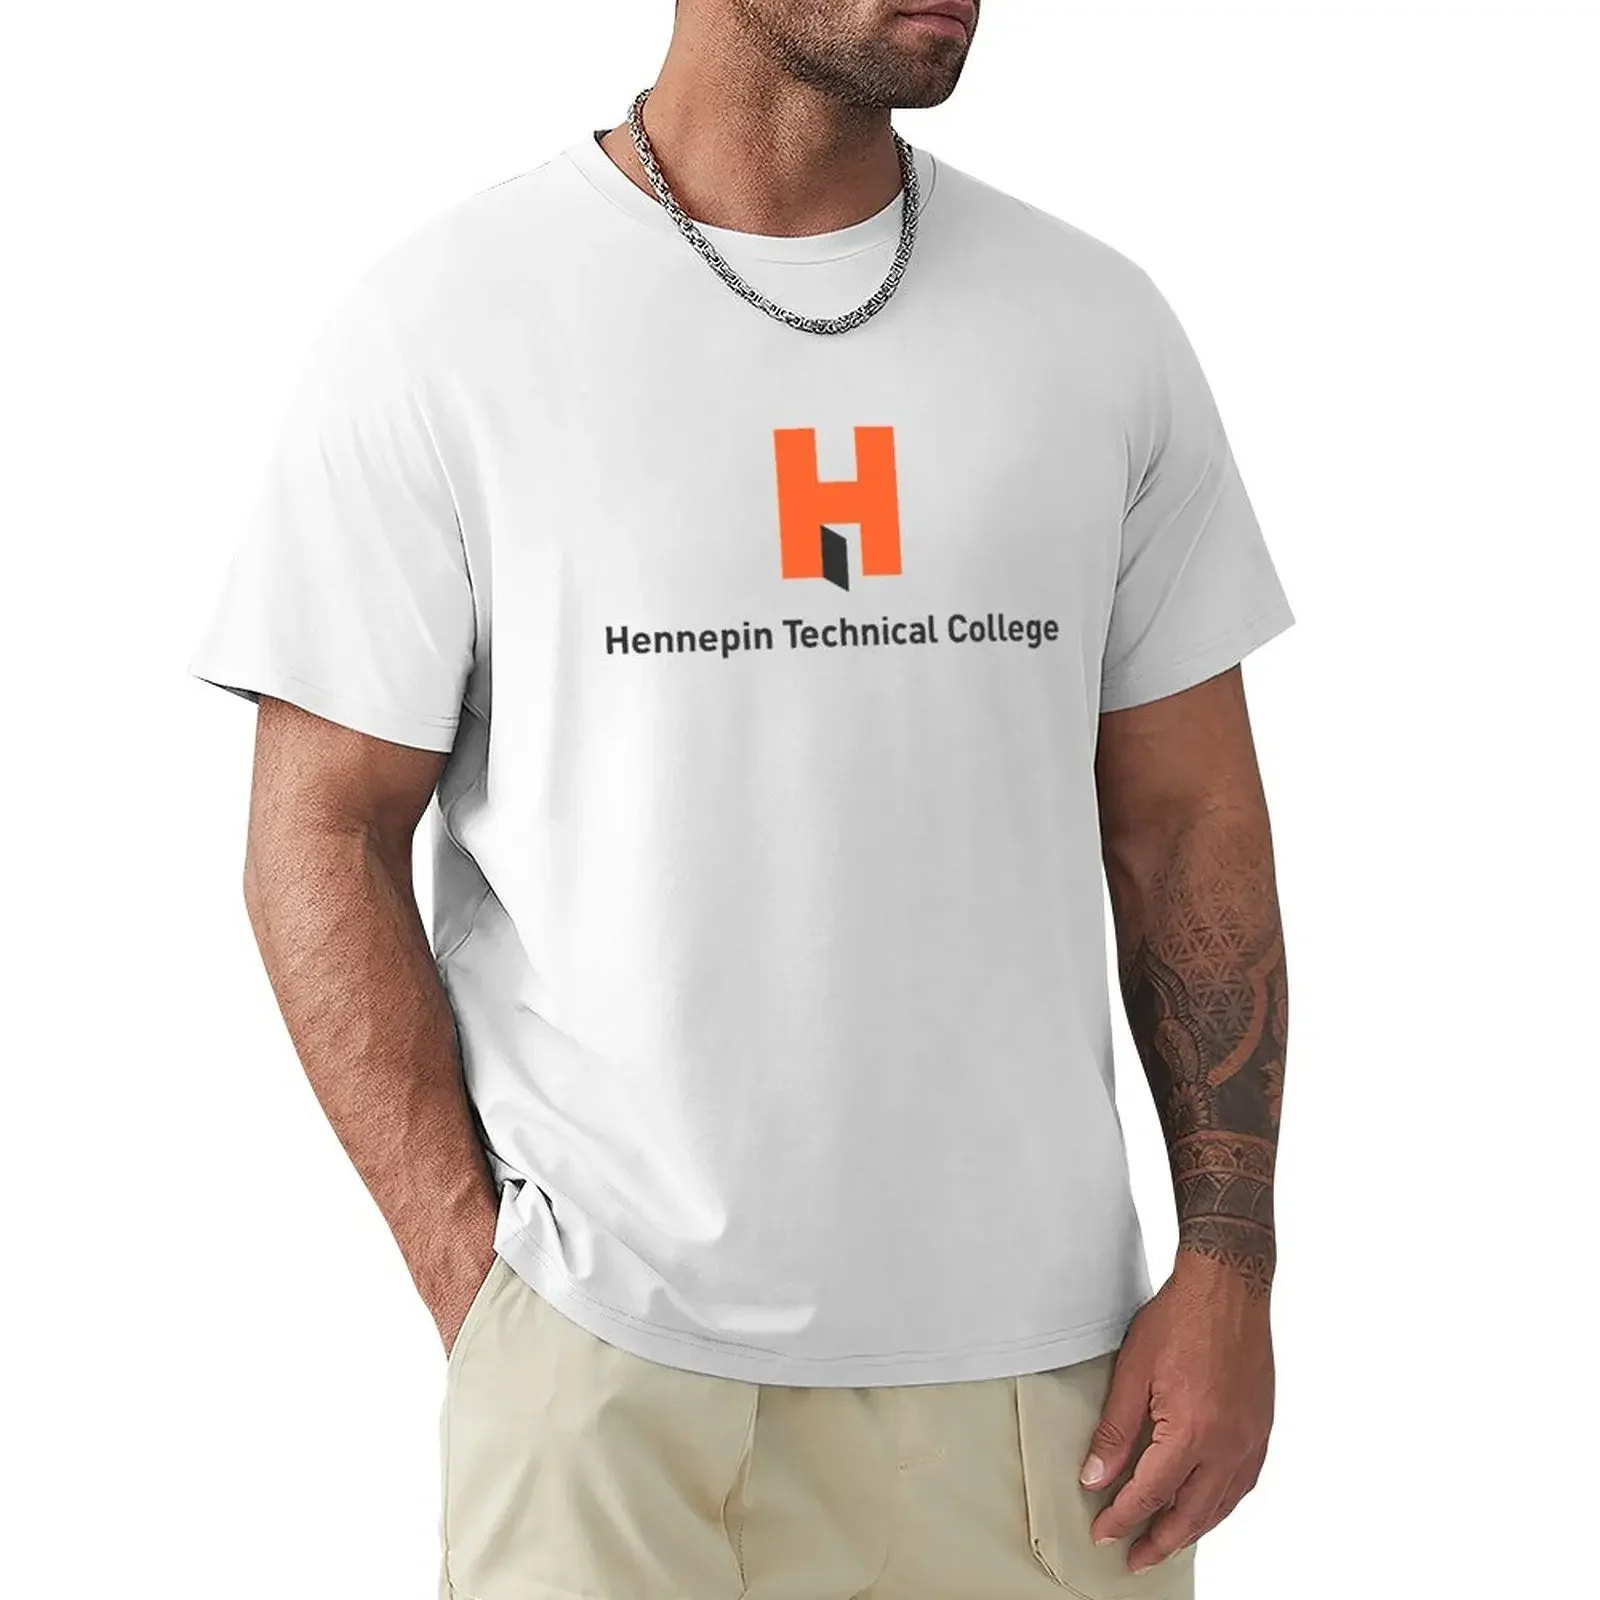 Hennepin Technical College T-Shirt plain animal prinfor boys oversizeds funny t shirts for men